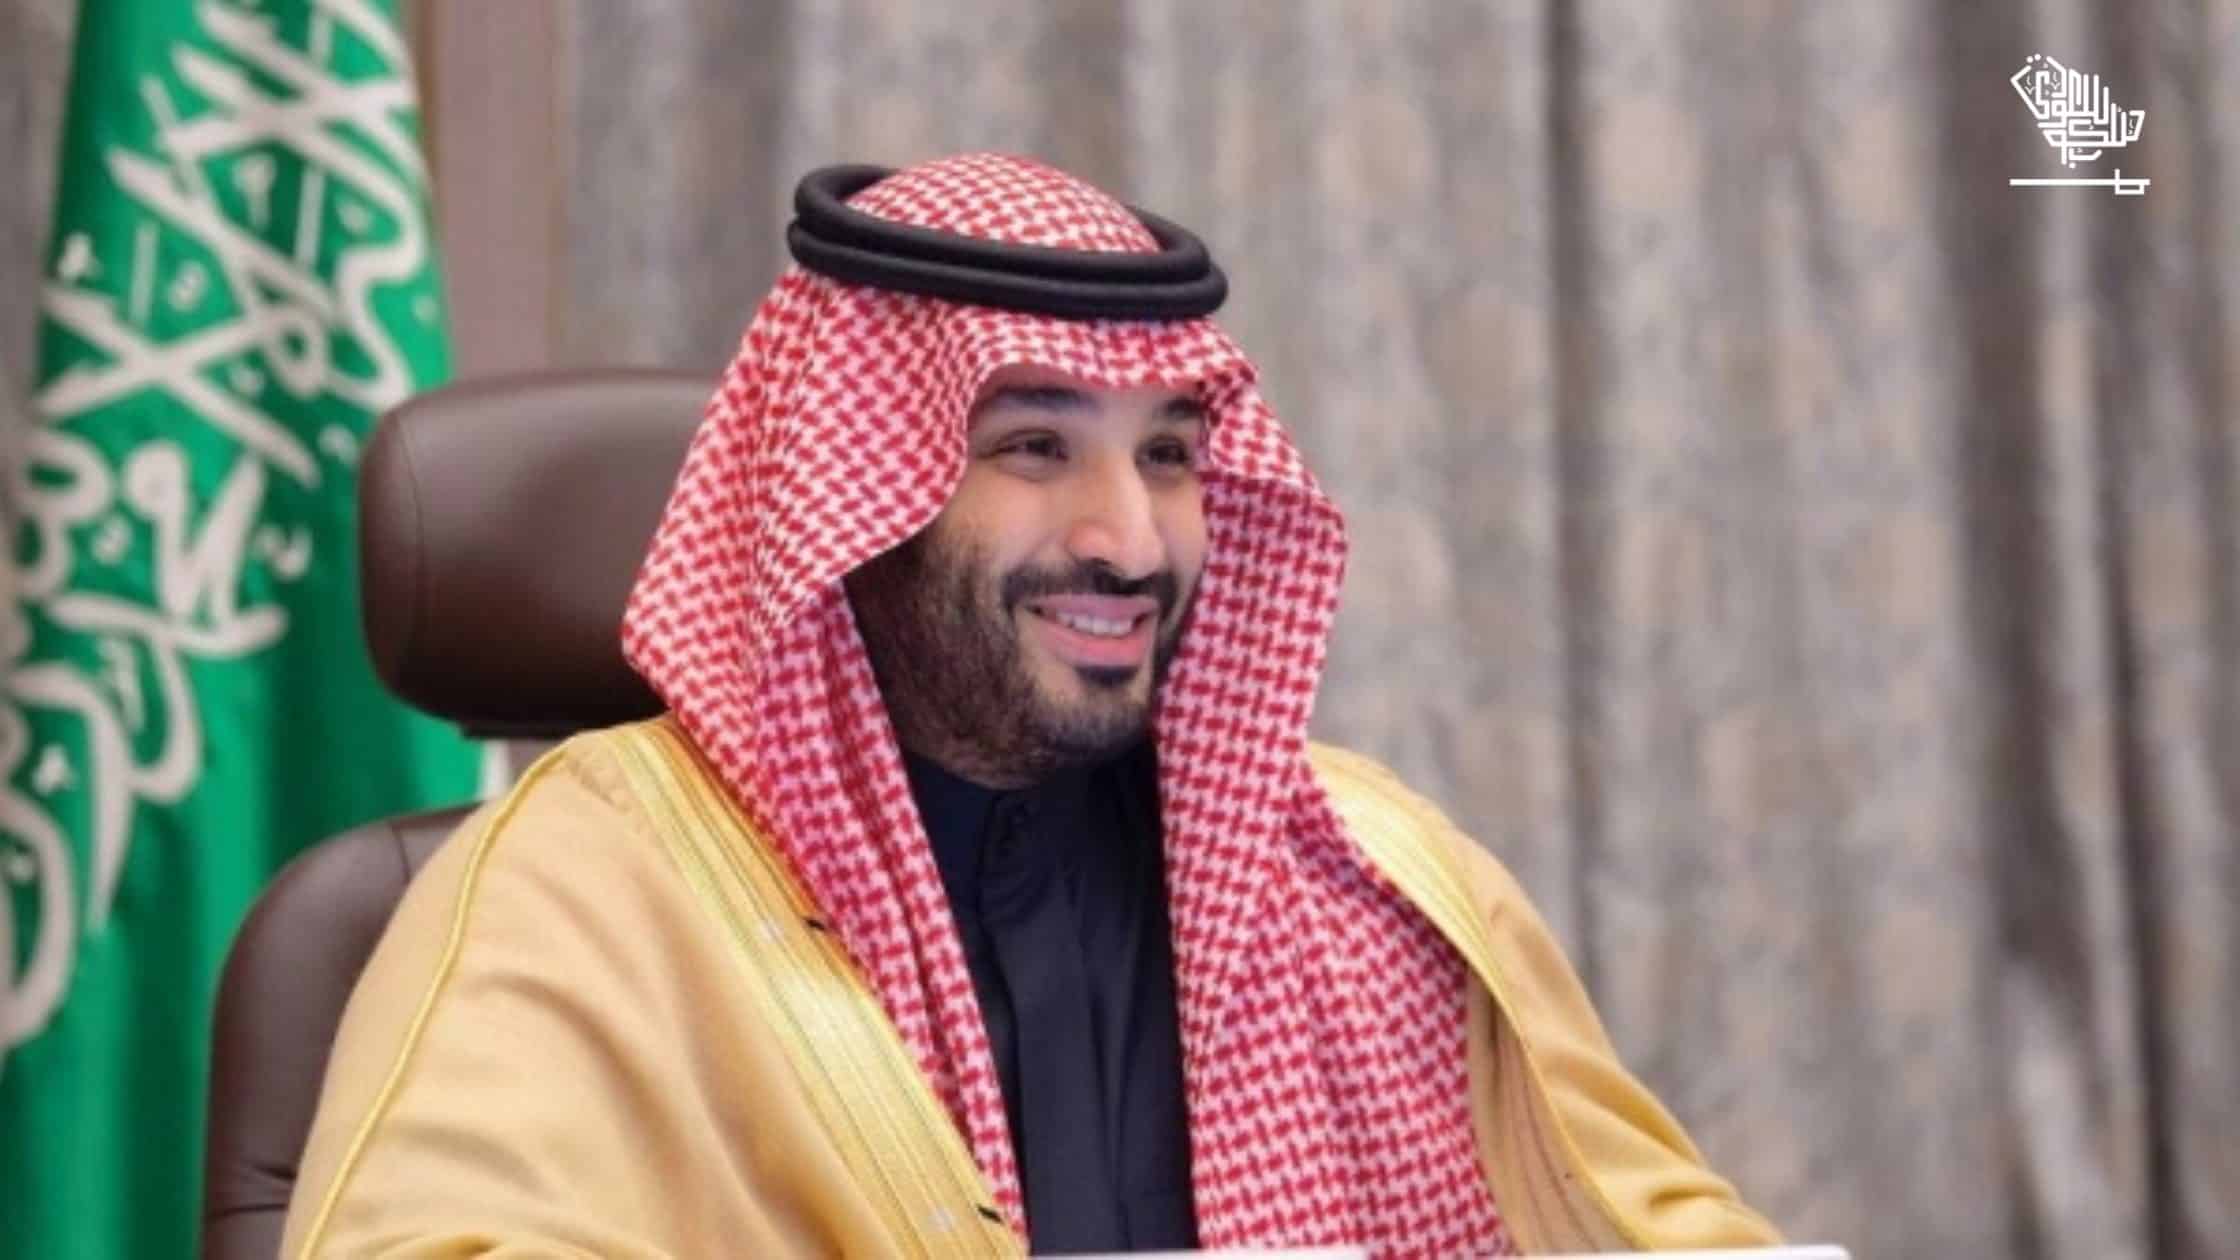 Saudi Arabia to donate $3mn to support education in the world's poorest countries: Crown Prince.